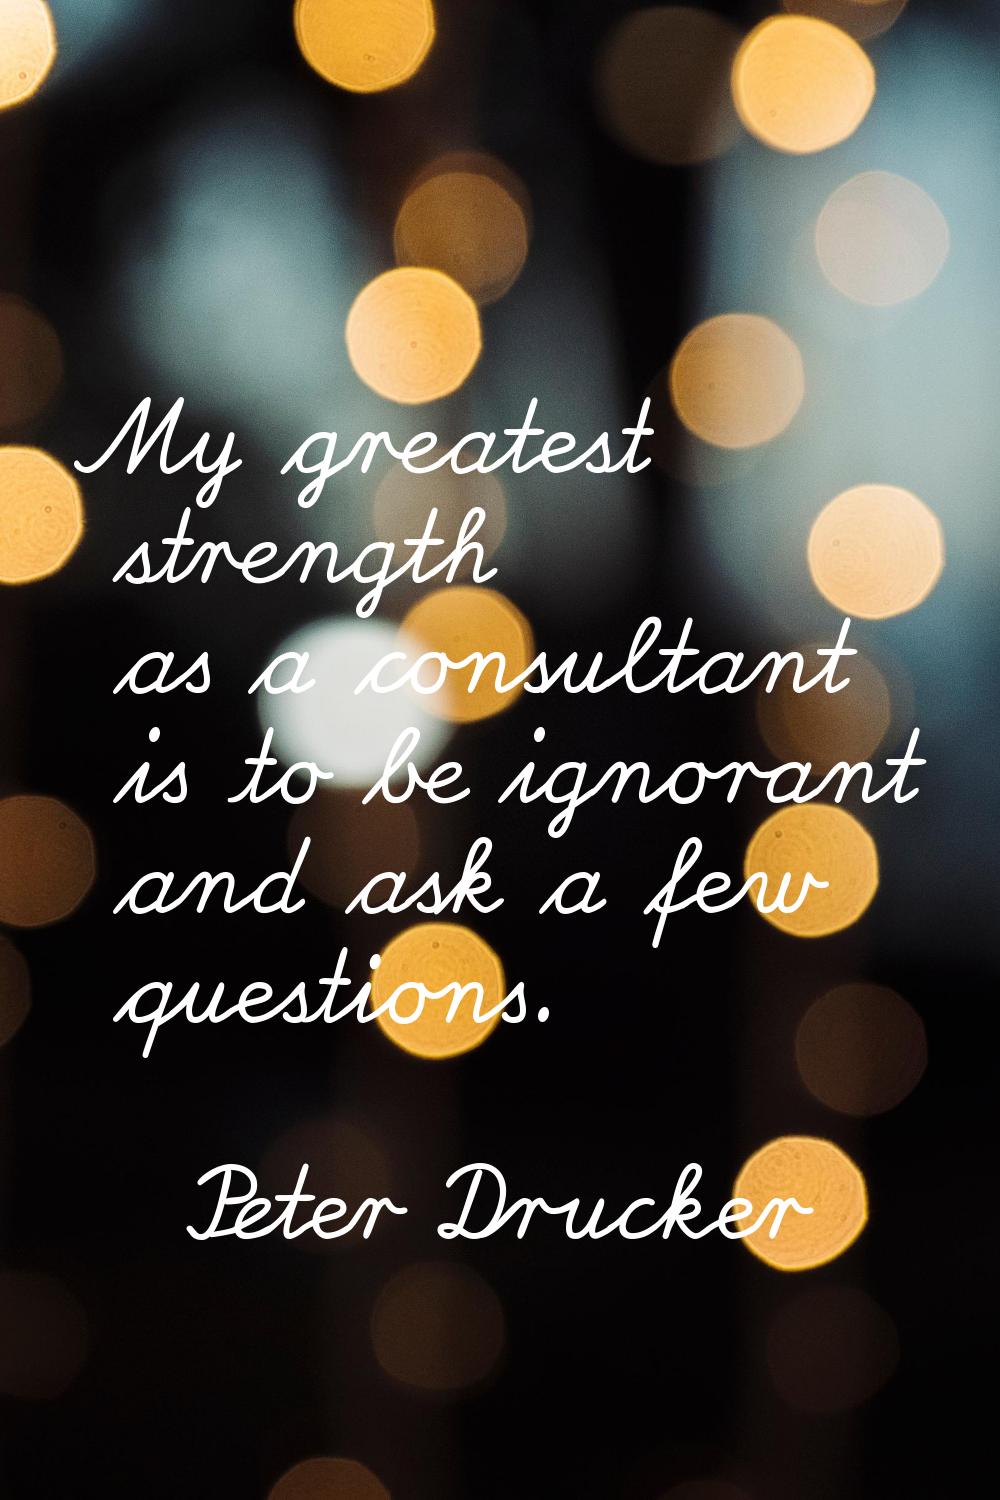 My greatest strength as a consultant is to be ignorant and ask a few questions.